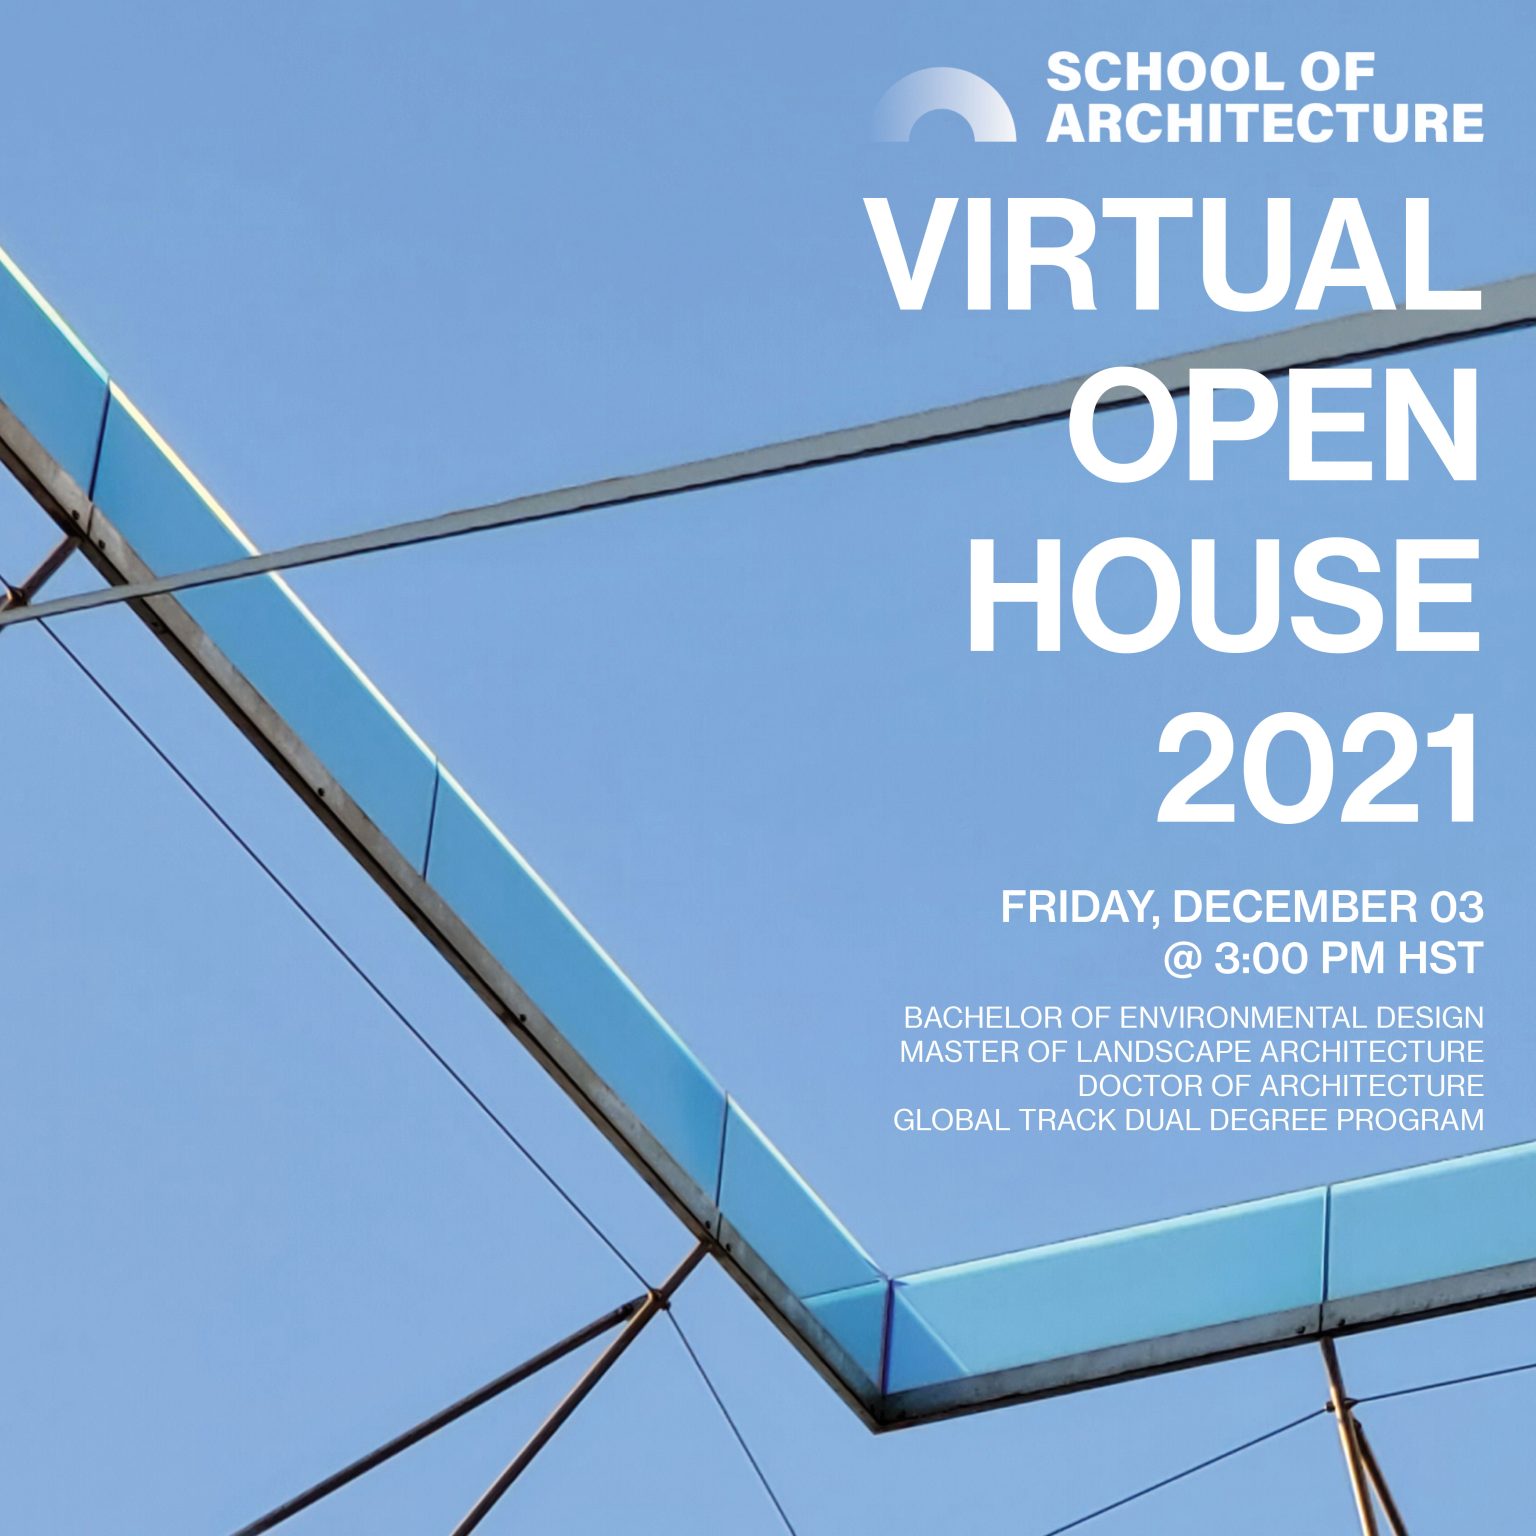 Please join us for a University of Hawaiʻi at Mānoa School of Architecture Virtual Open House!